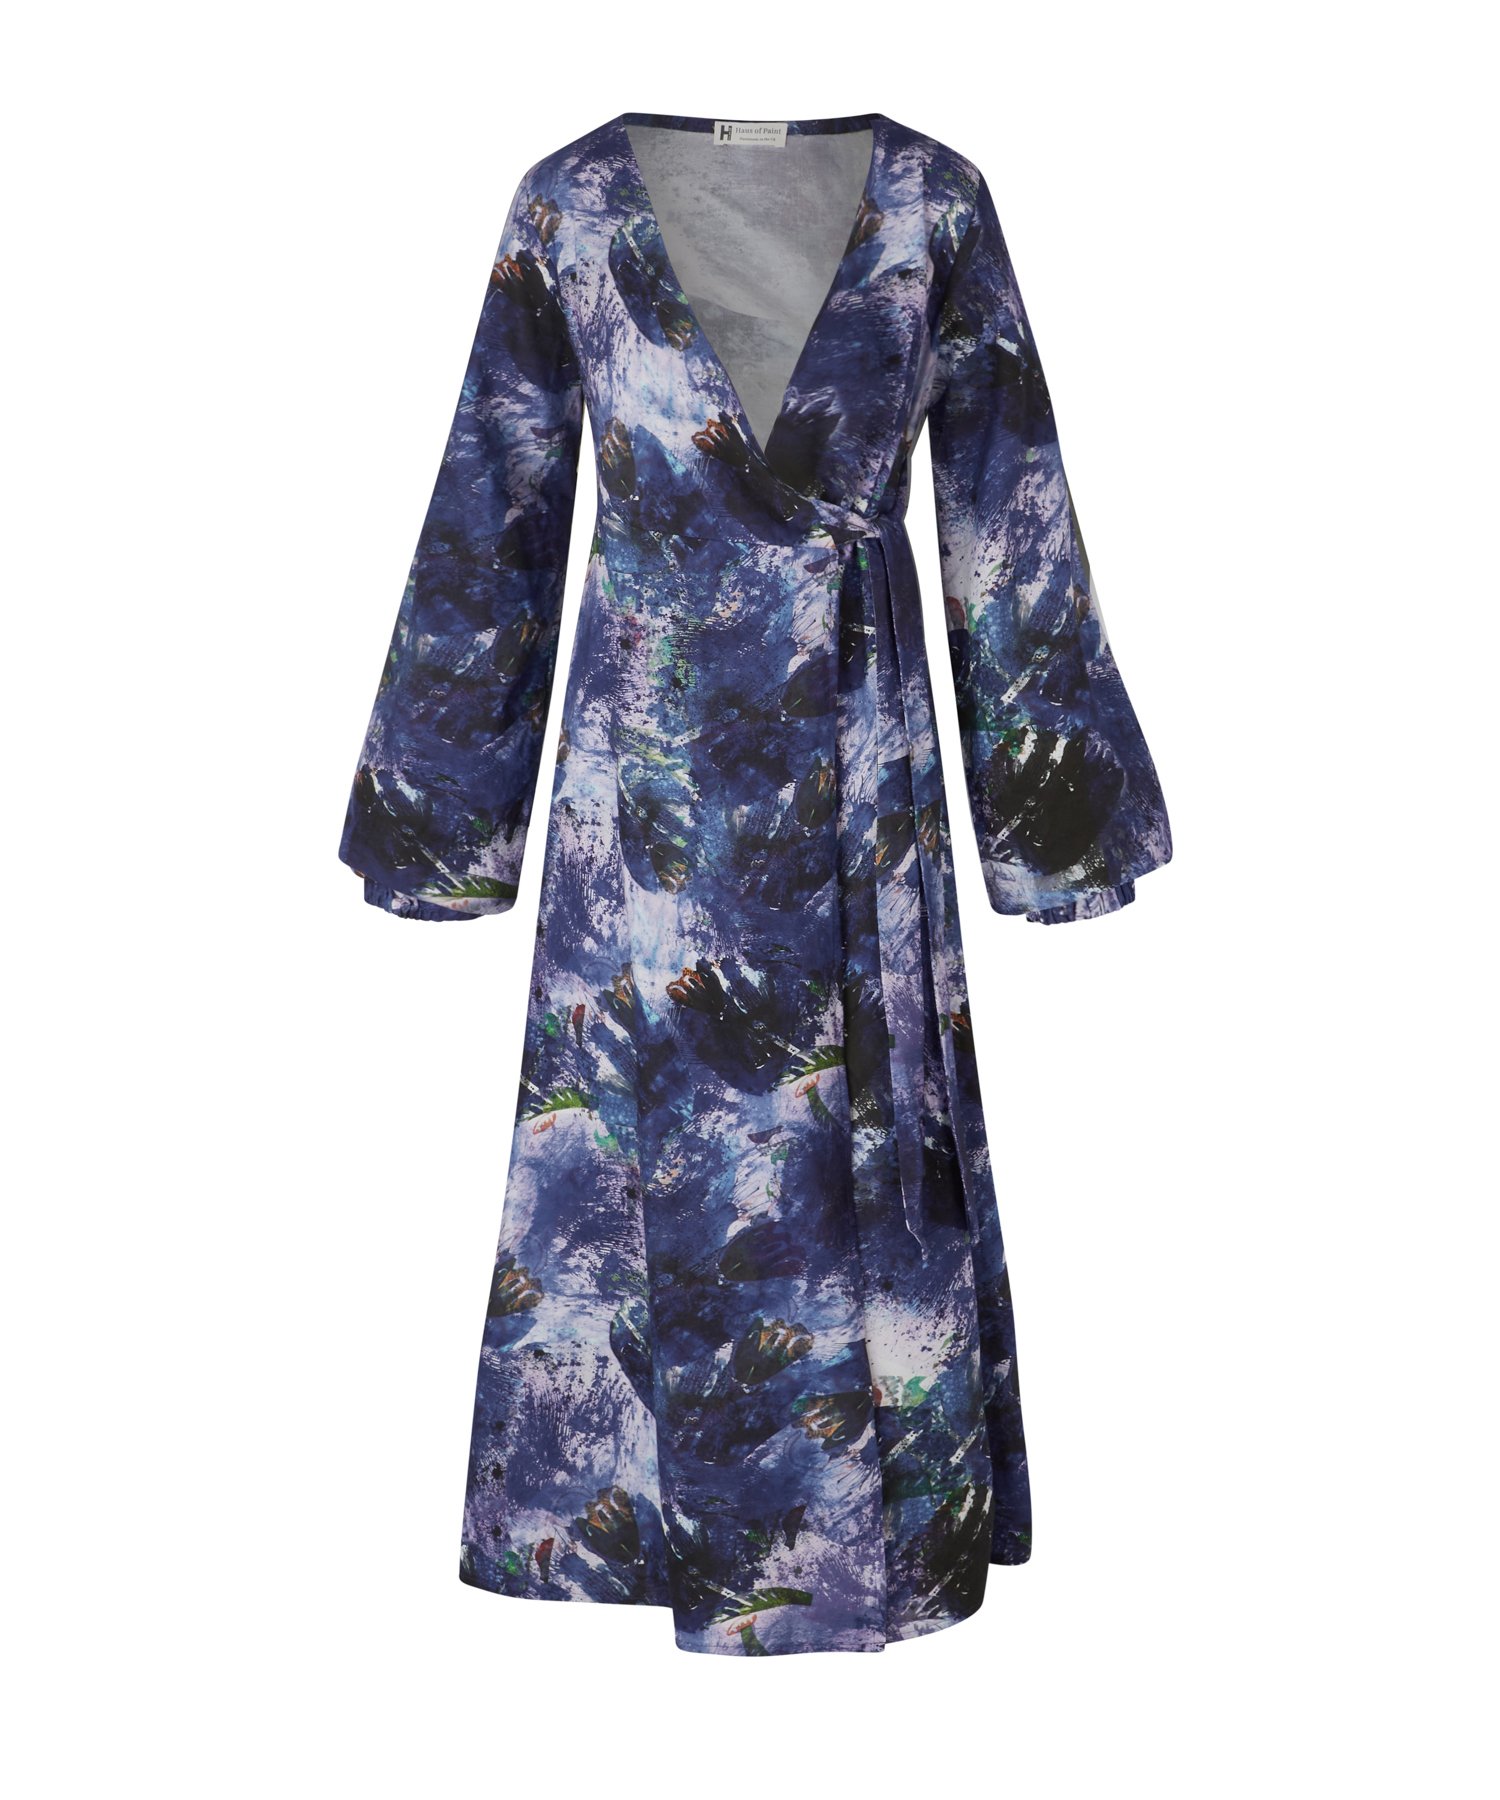 Image of S/S 22 Watercolour  Blue Iris Wrap Dress With Side Slit. Handmade to Order. Choice of 2 Fabrics.